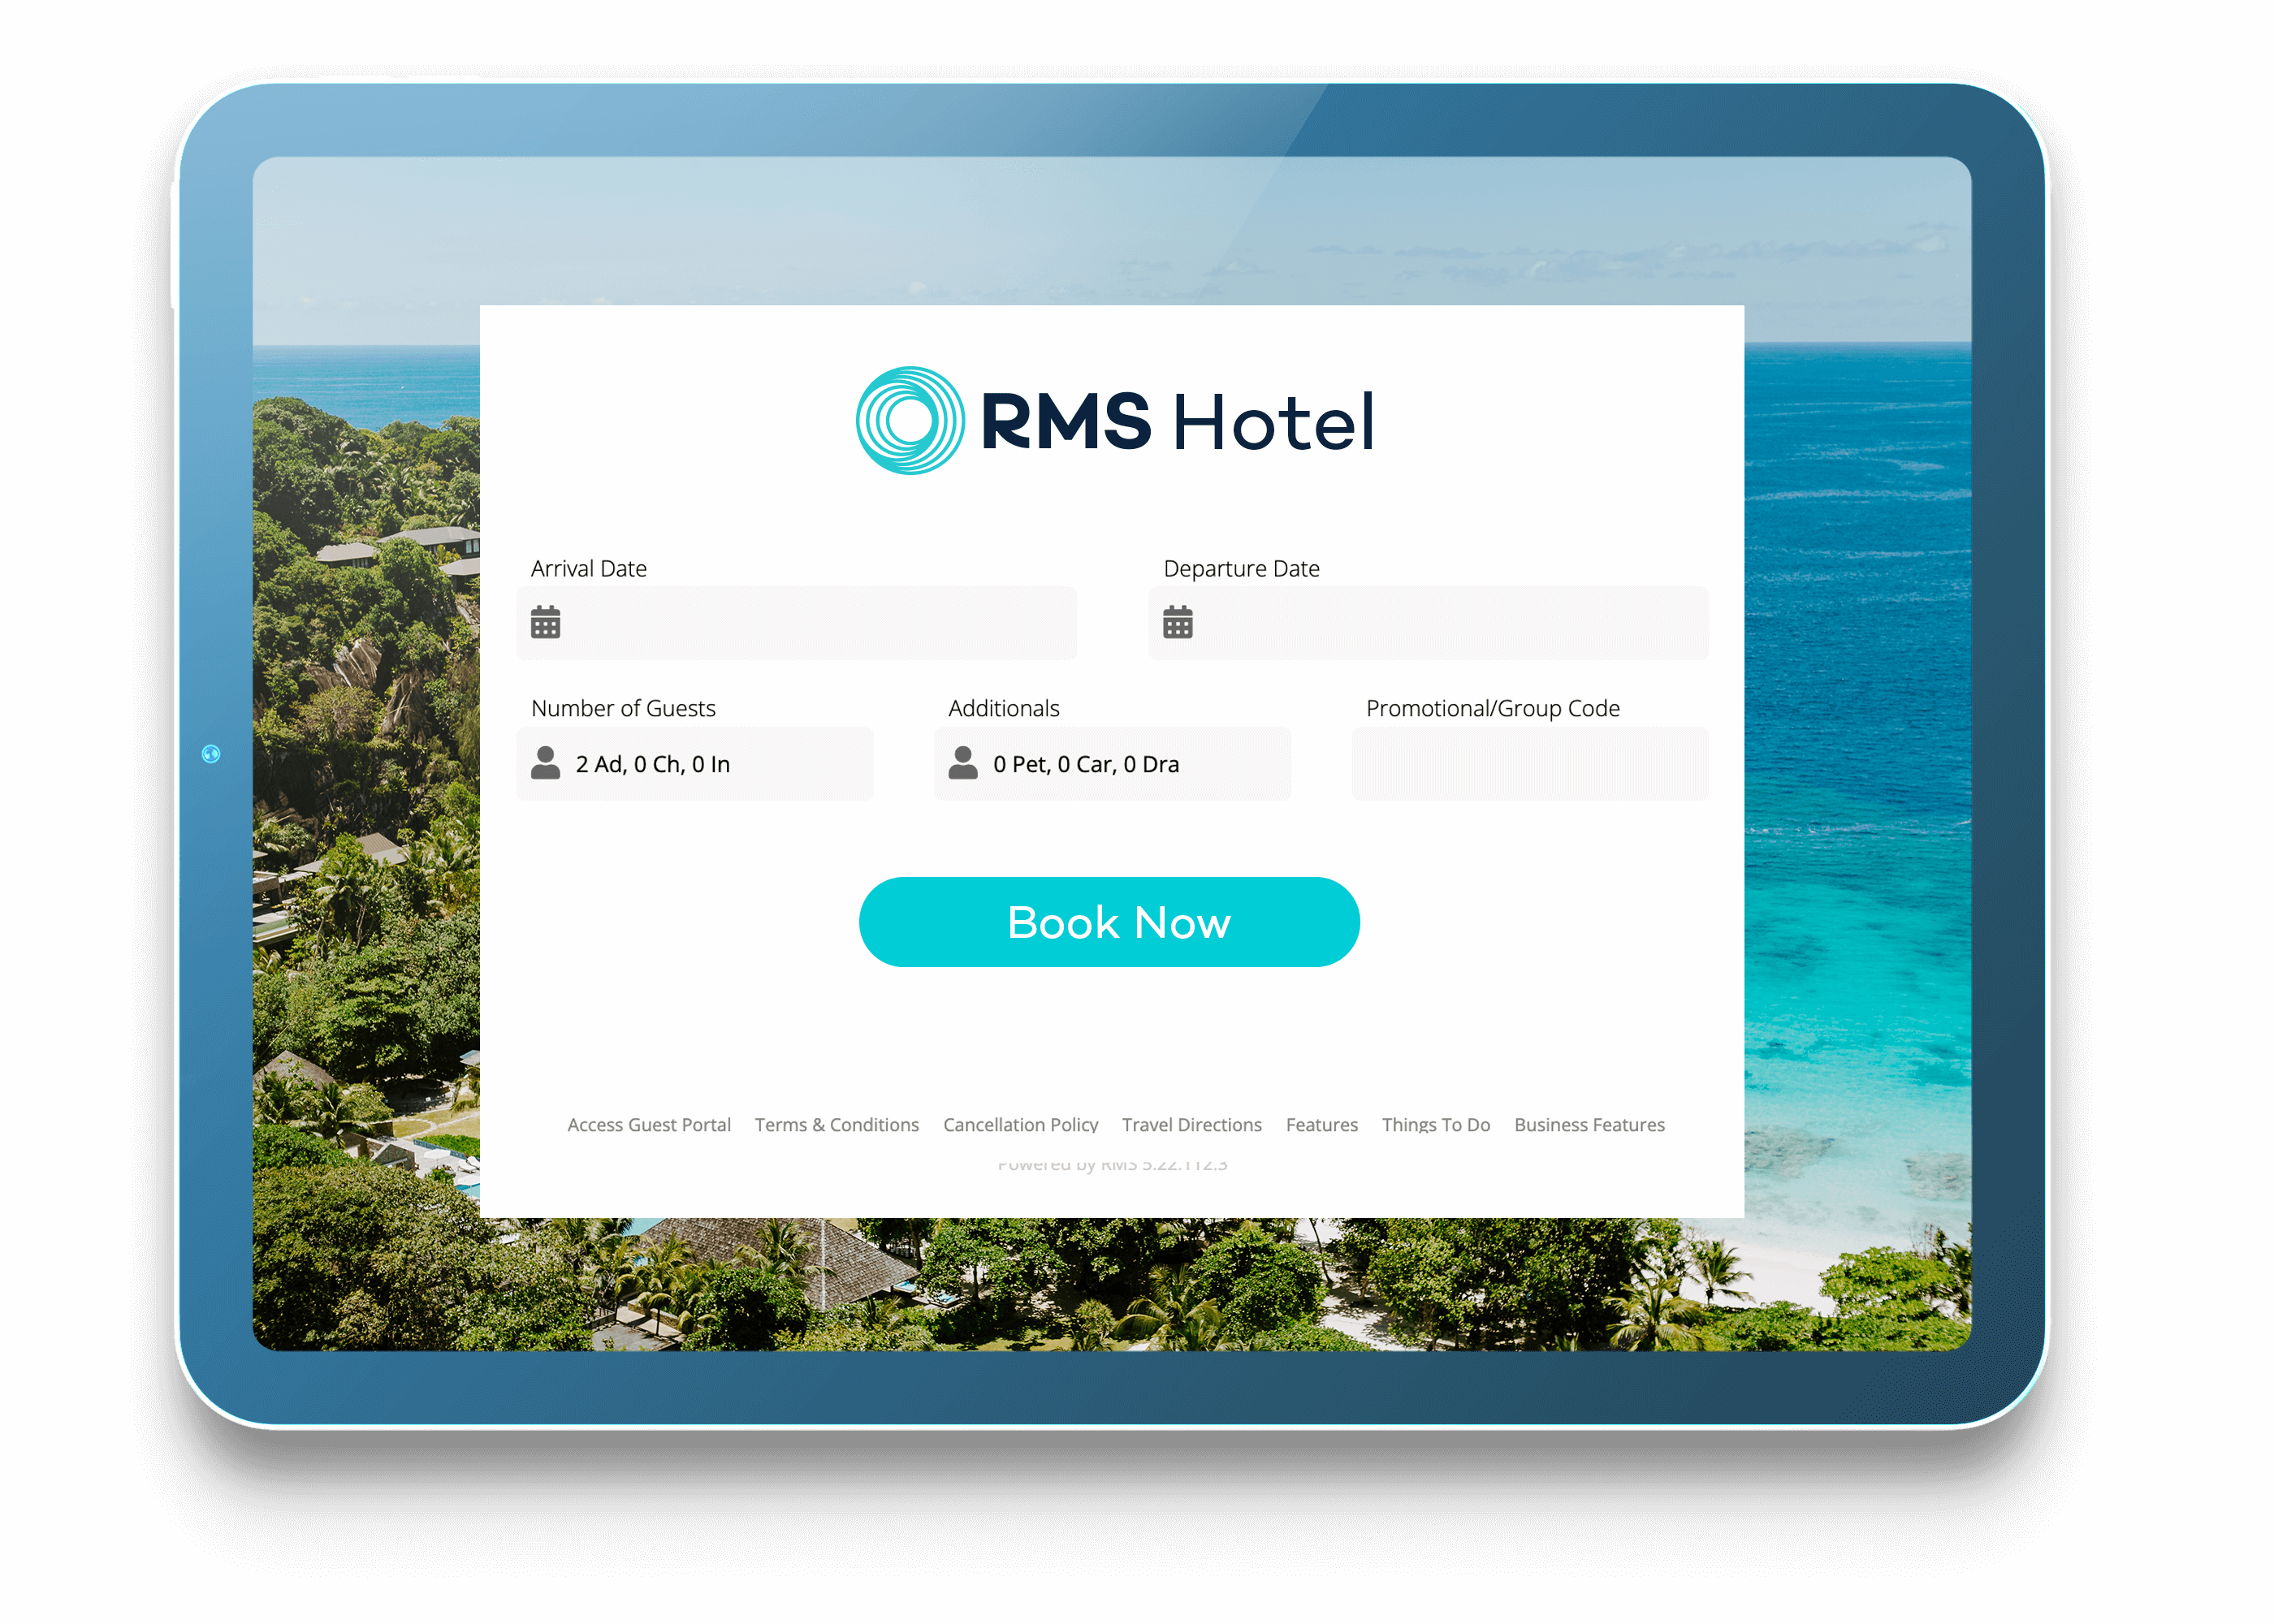 Internet booking engine for hotels with a book now button